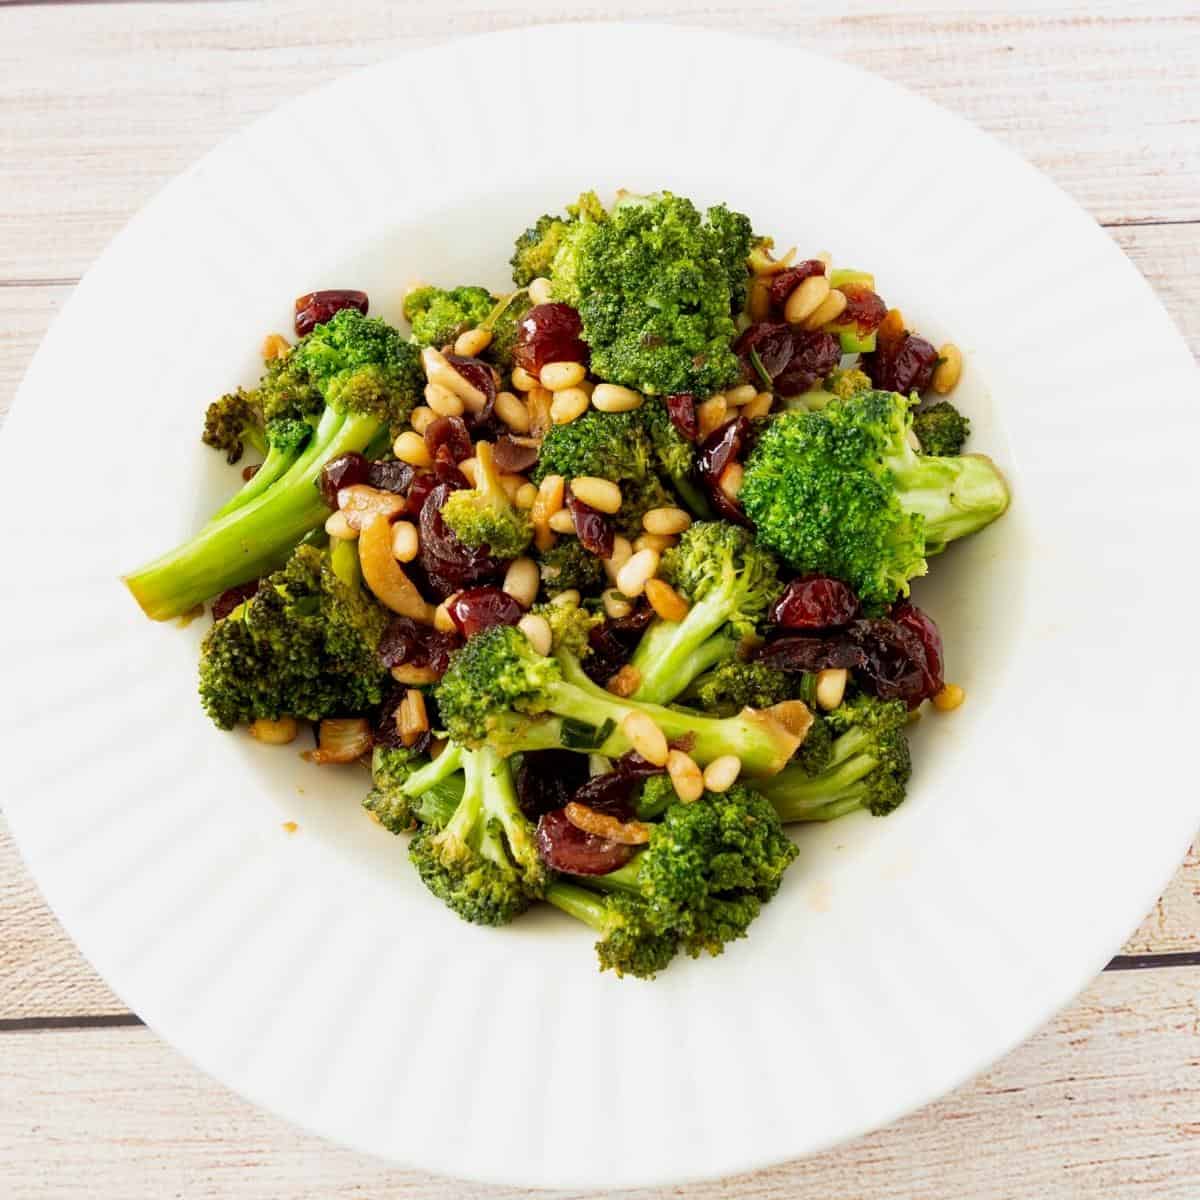 A bowl with sautéed broccoli with cranberries.